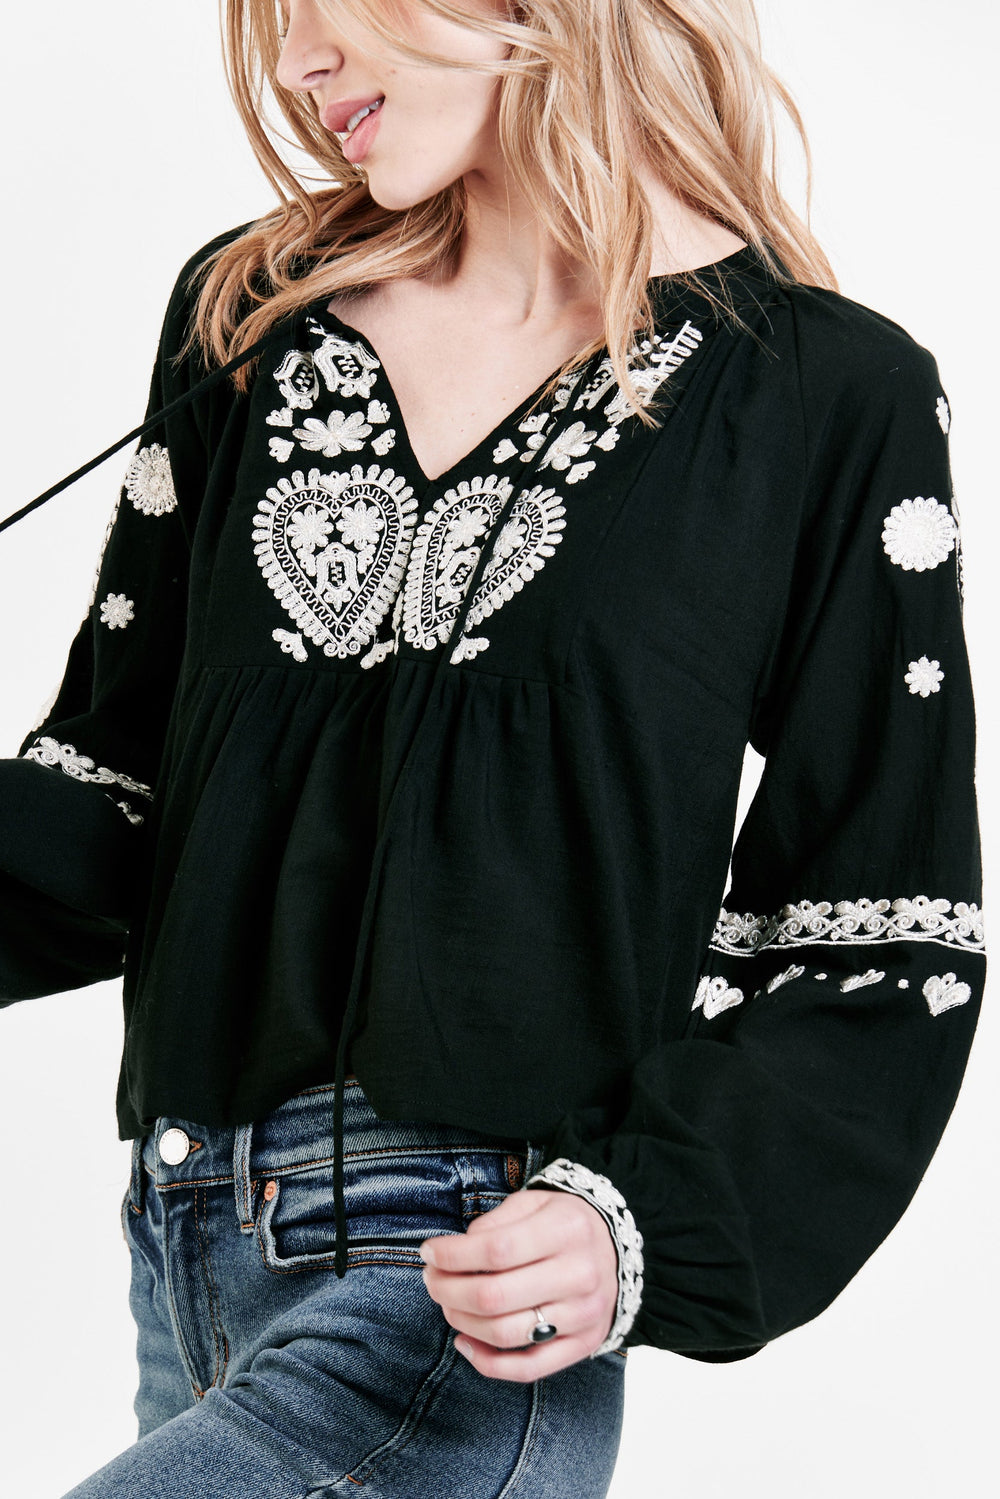 image of a female model wearing a NATALIA EMBROIDERY DETAIL TOP BLACK TOPS